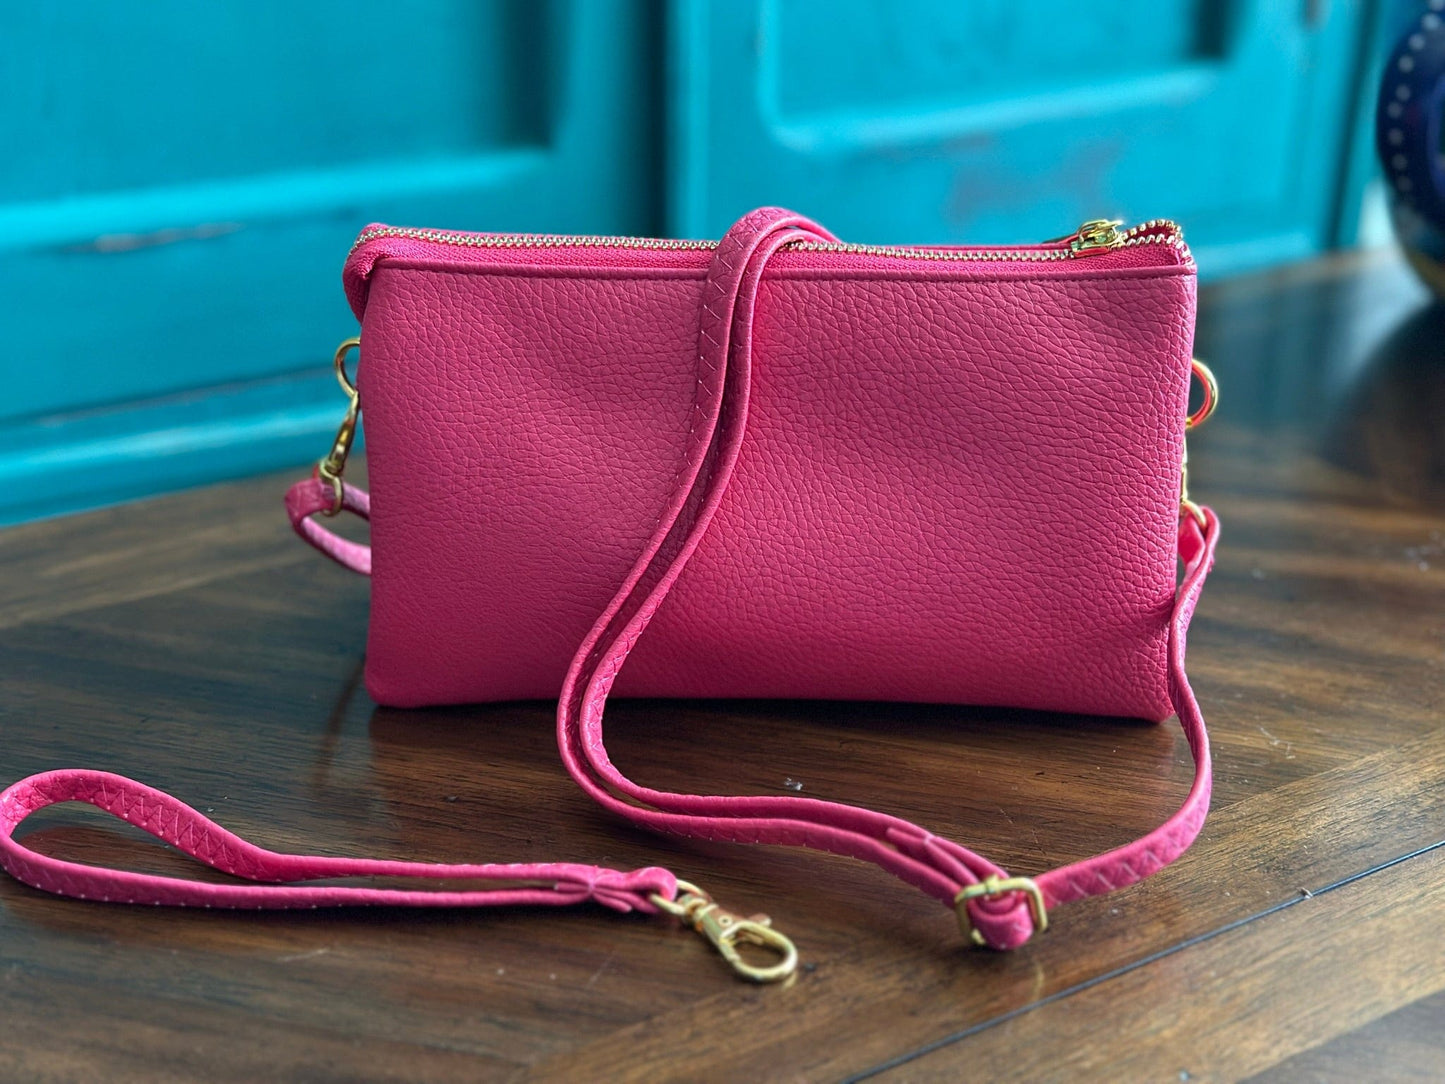 BRIGHT PINK WRISTLET OR PURSE